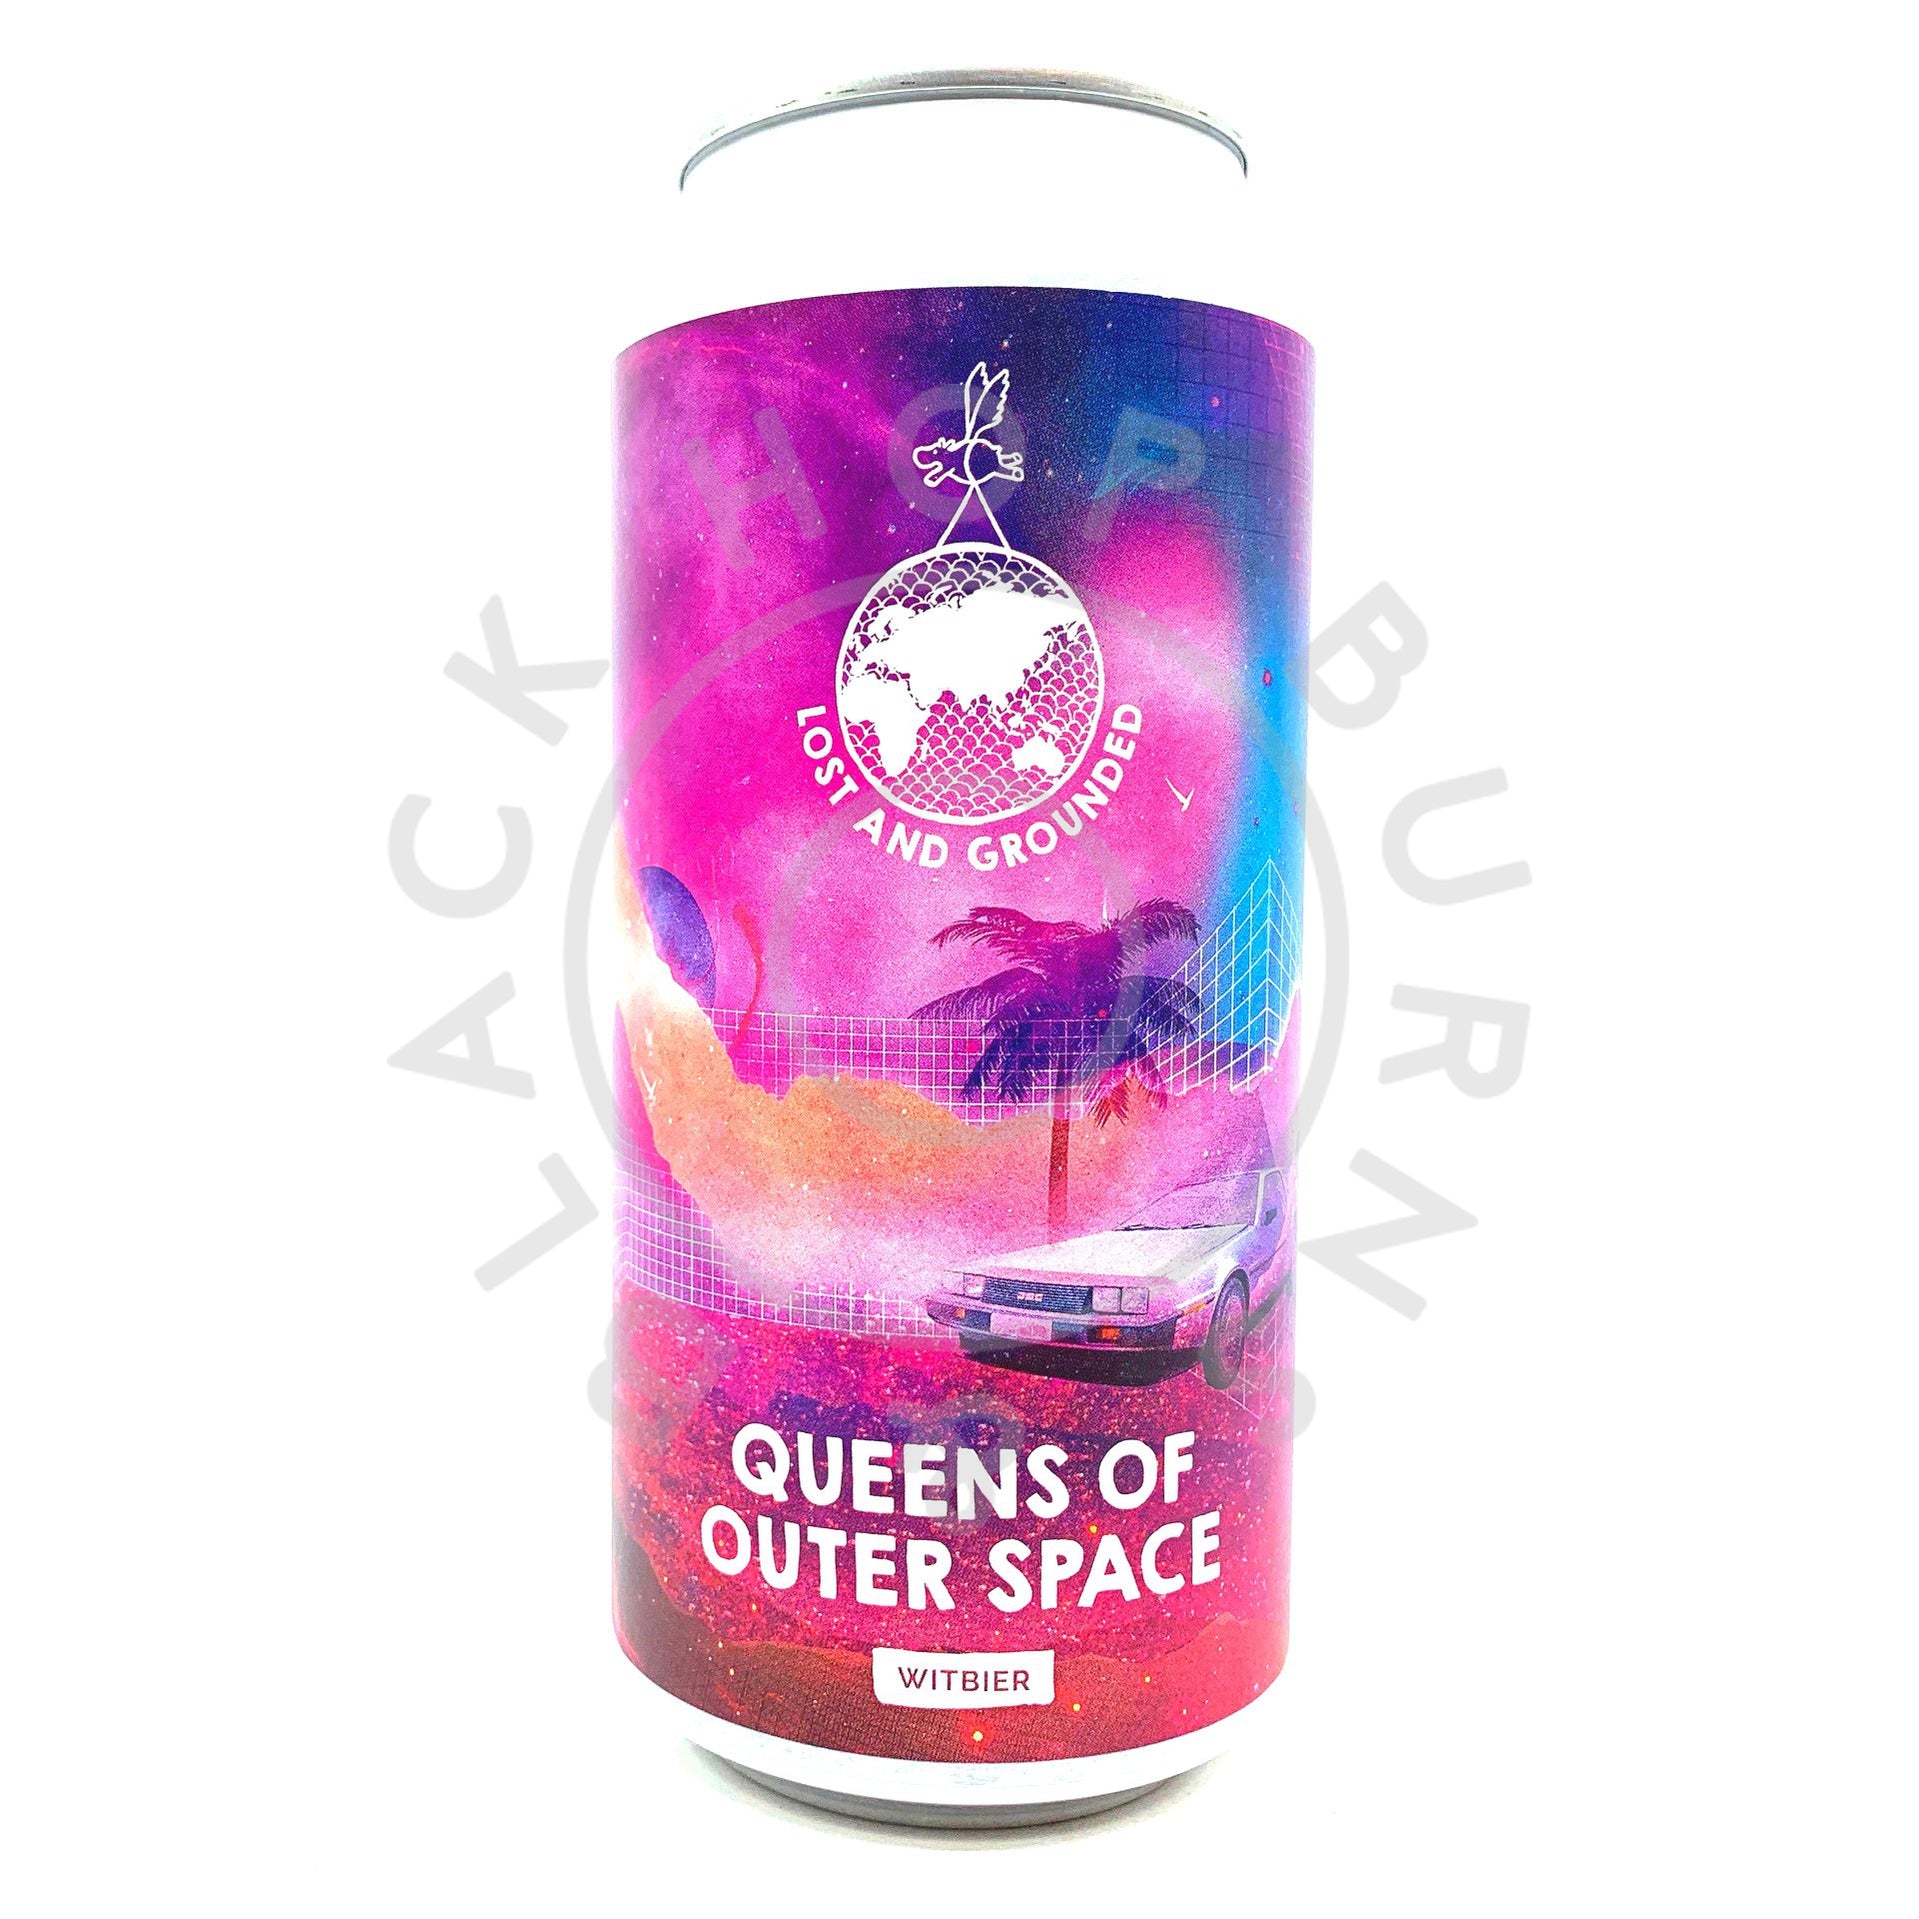 Lost & Grounded Queens Of Outer Space Witbier 4.4% (440ml can)-Hop Burns & Black